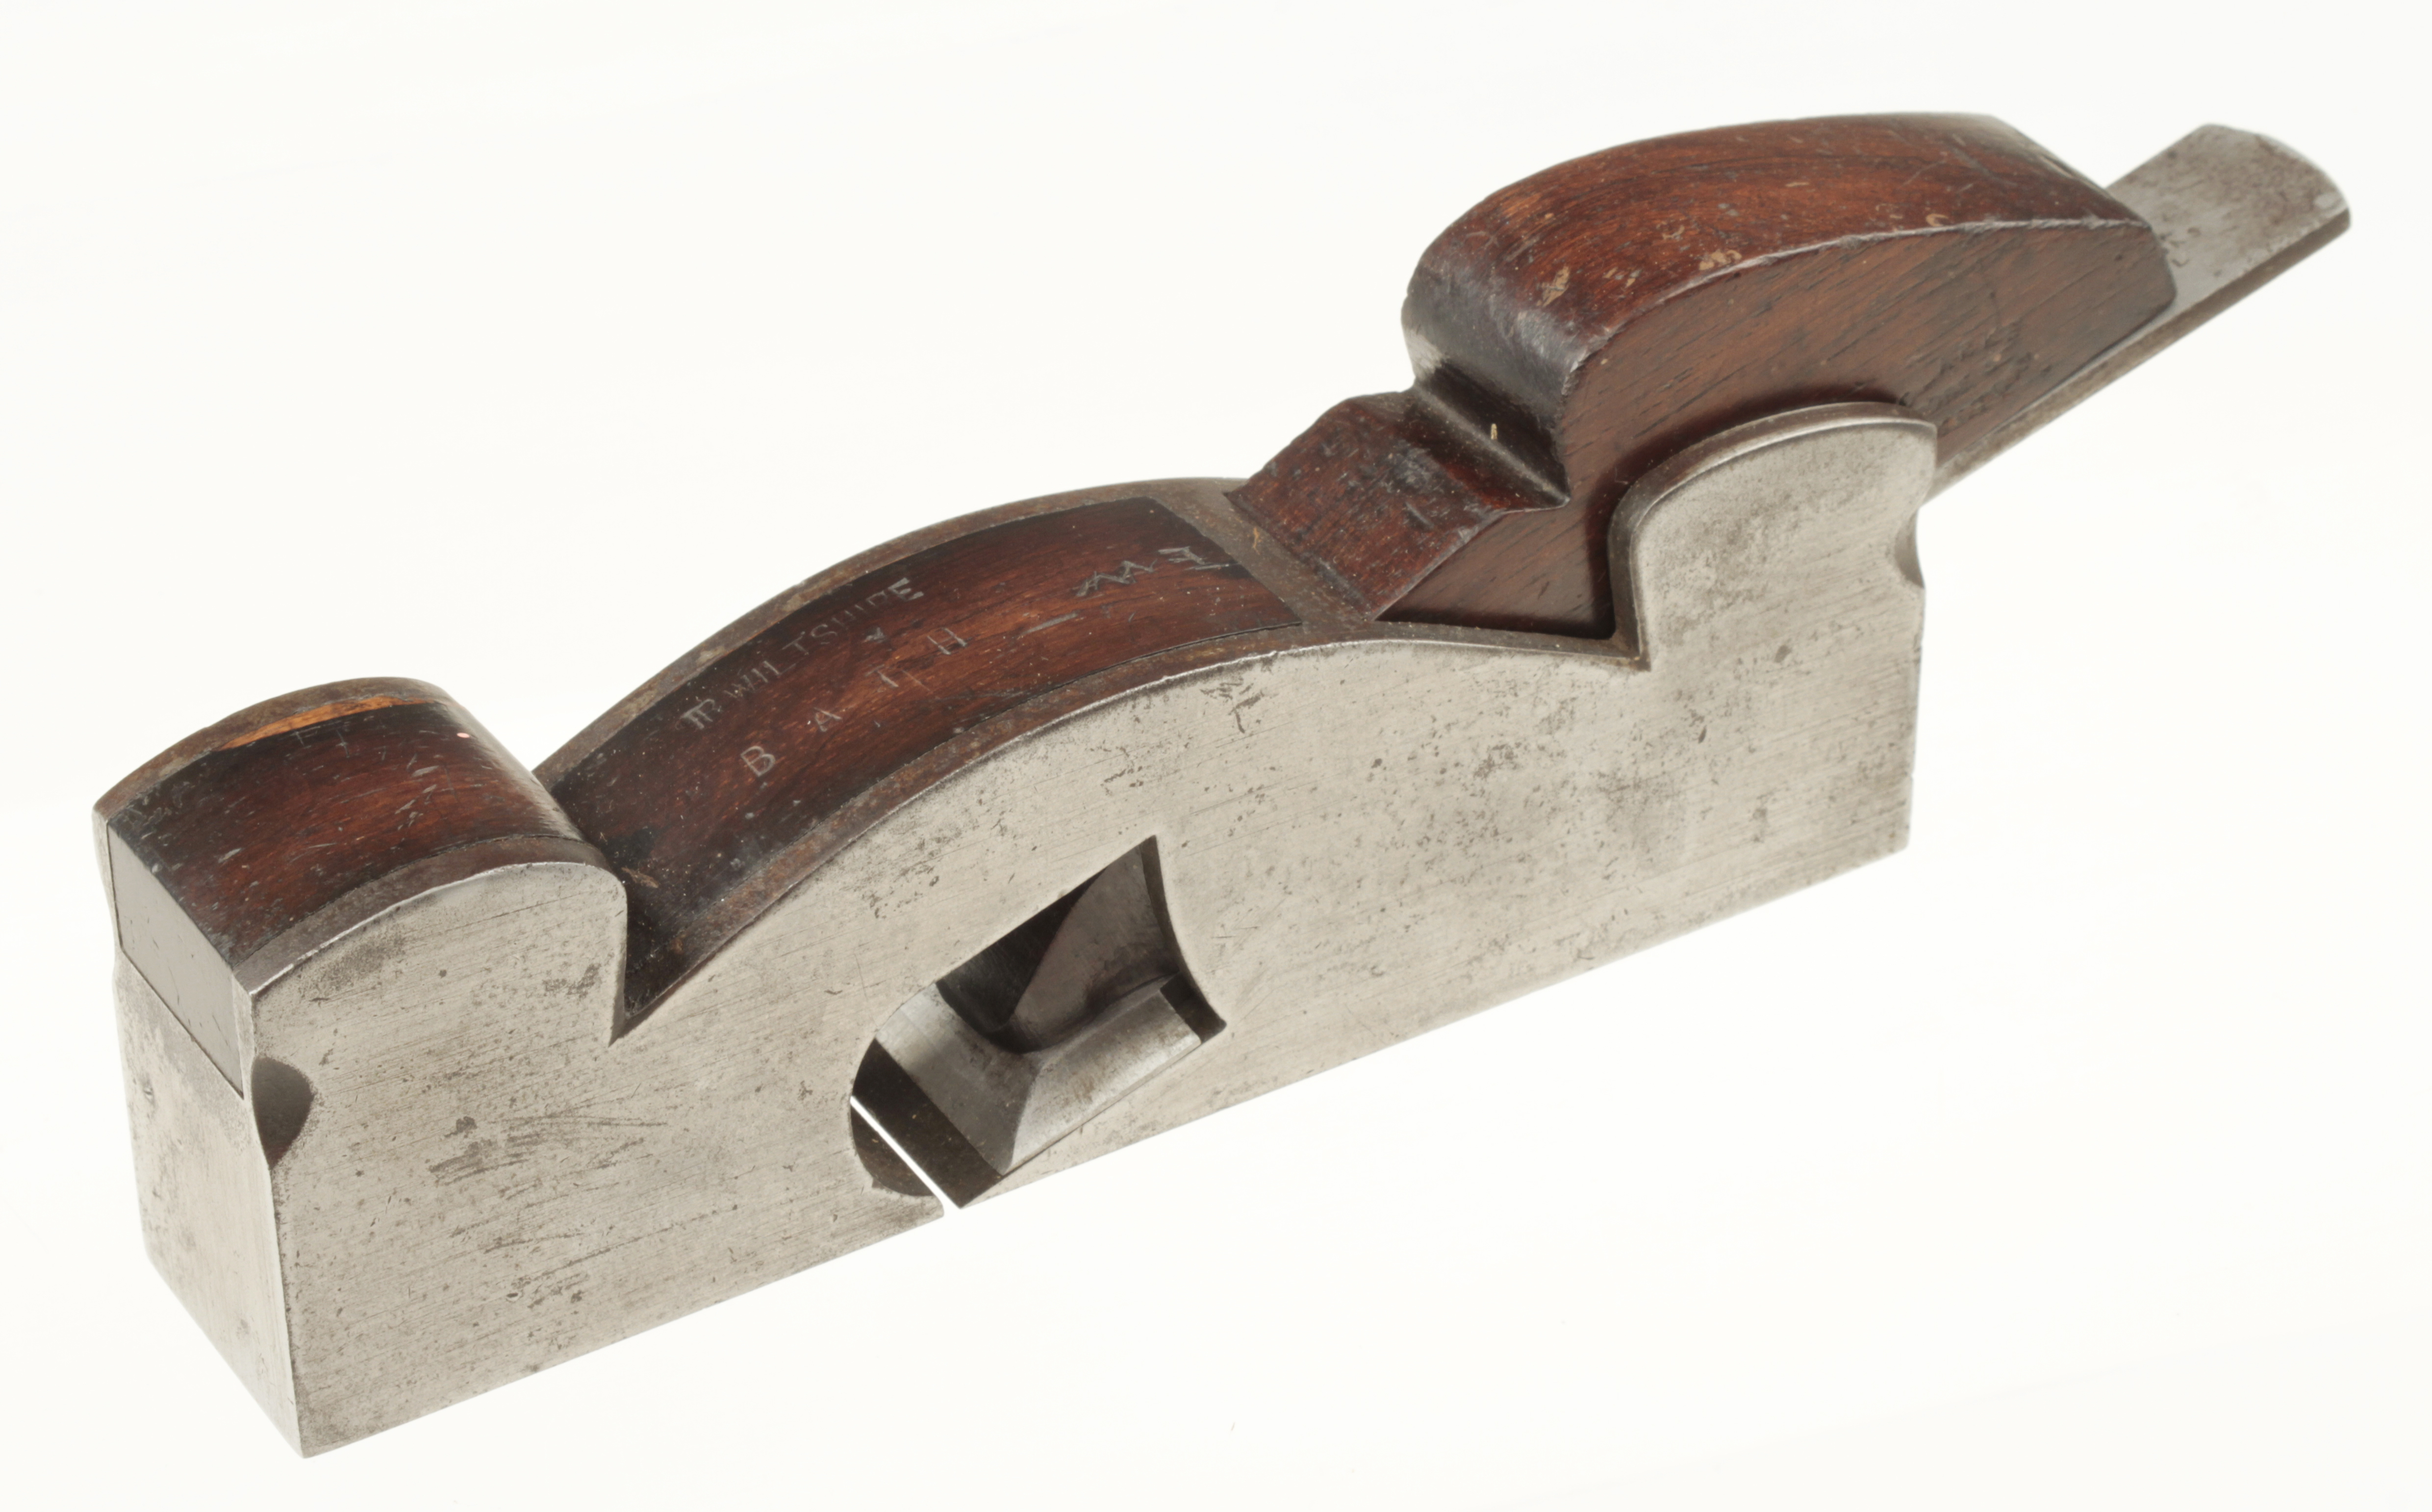 A 1 1/2" iron shoulder plane by SLATER with rosewood infill and wedge G+